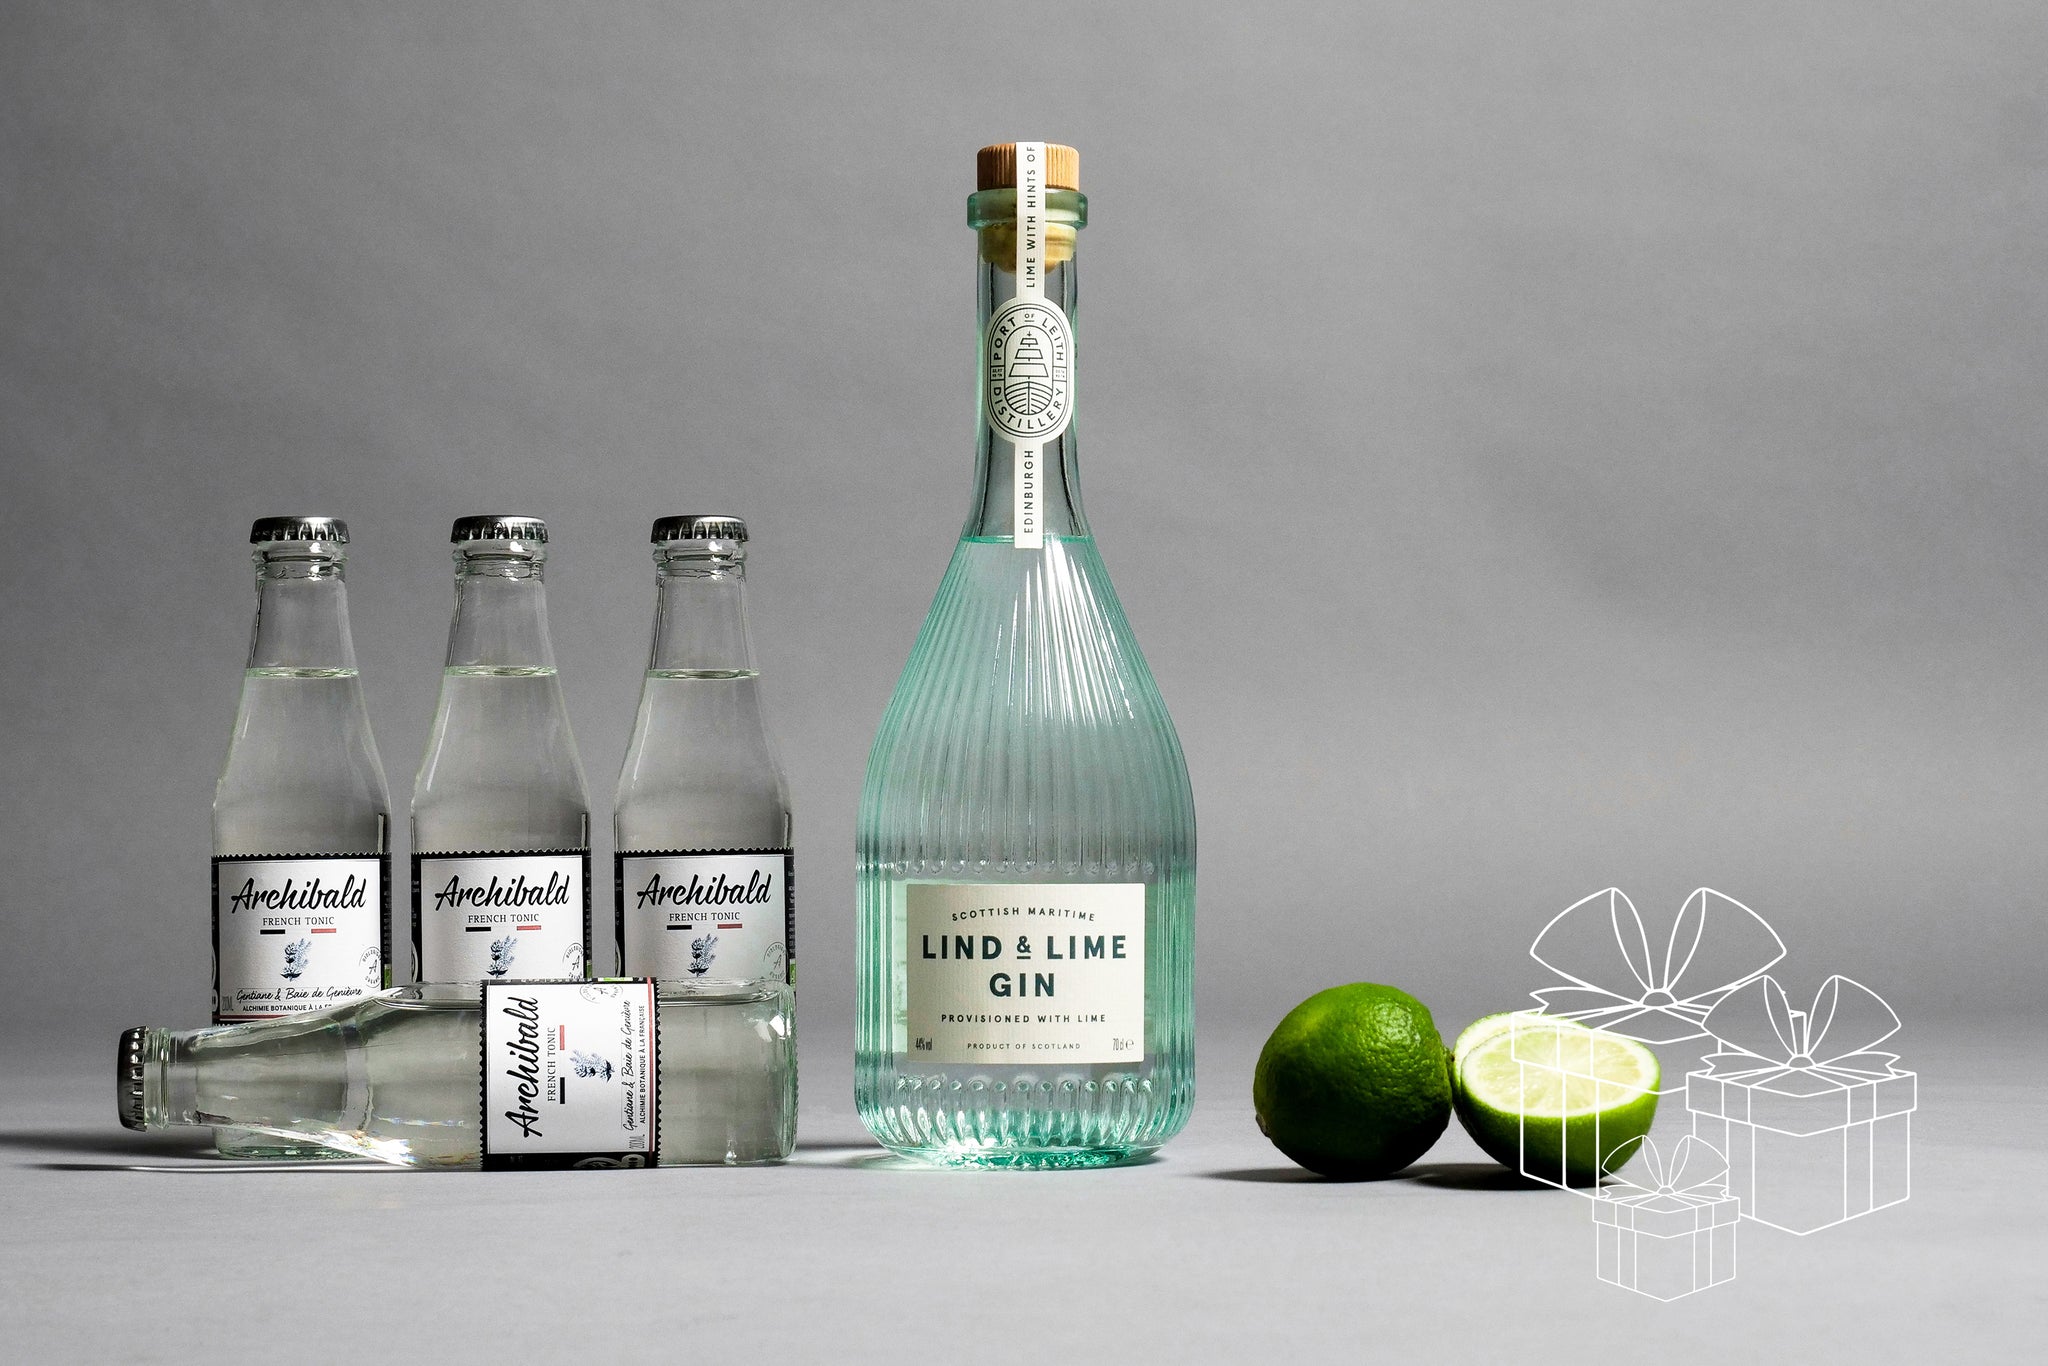 BOX LIND & LIME GIN 44% 700 ML. & 4 ARCHIBALD FRENCH TONIC 200 ML.